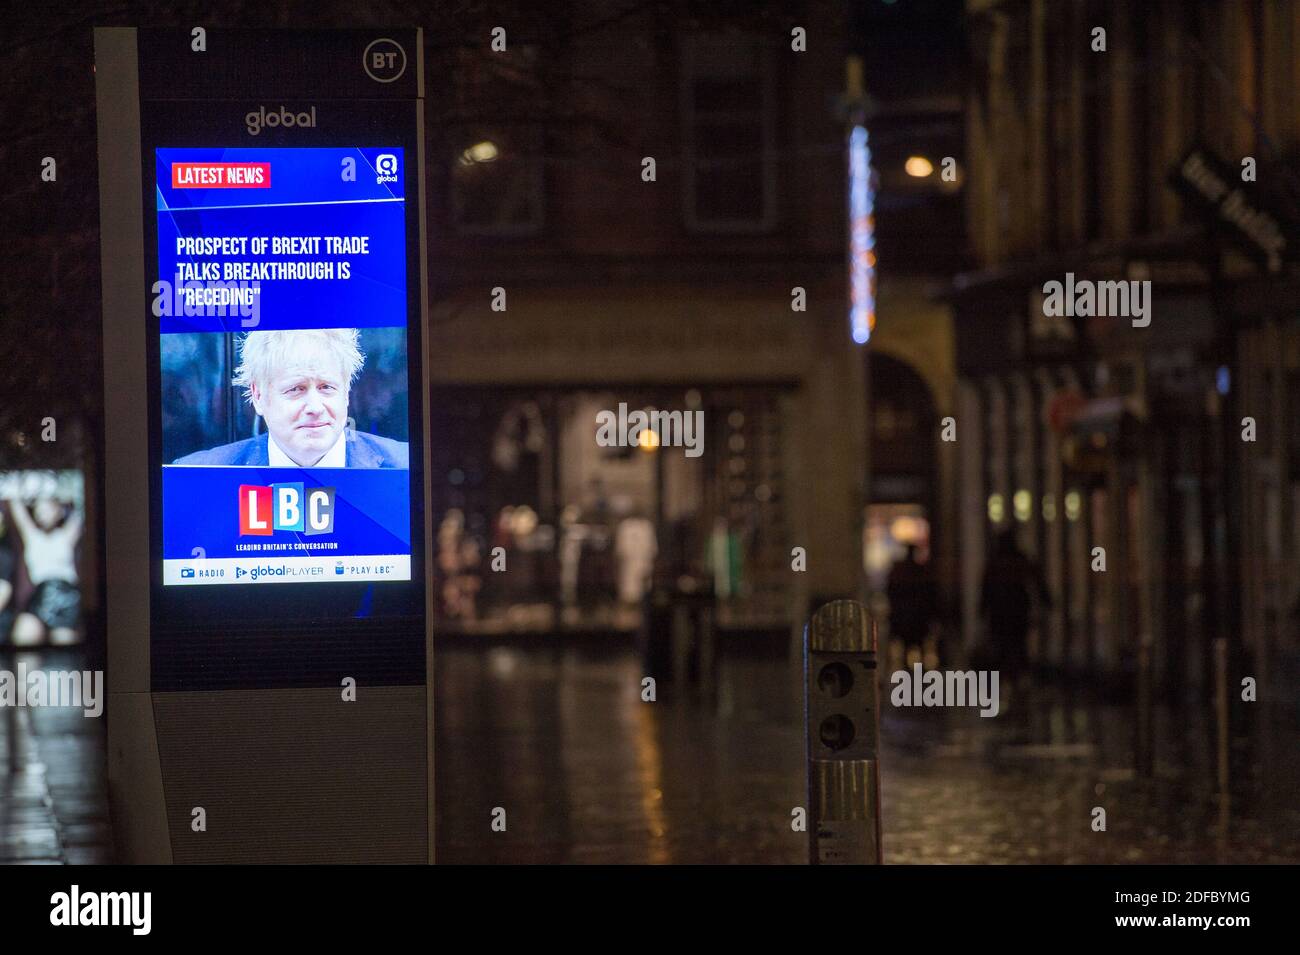 Glasgow, Scotland, UK. 4th Dec, 2020. Pictured: Live news TV screen in Glasgow's city centre showing the UK Prime Minister, Boris Johnson MP, with a headline, PROSPECT OF BREXIT TRADE TALKS BREAKTHROUGH IS ‘RECEDING'. With an empty street in the background during what would normally be a busy morning rush hour street scene. Credit: Colin Fisher/Alamy Live News Stock Photo